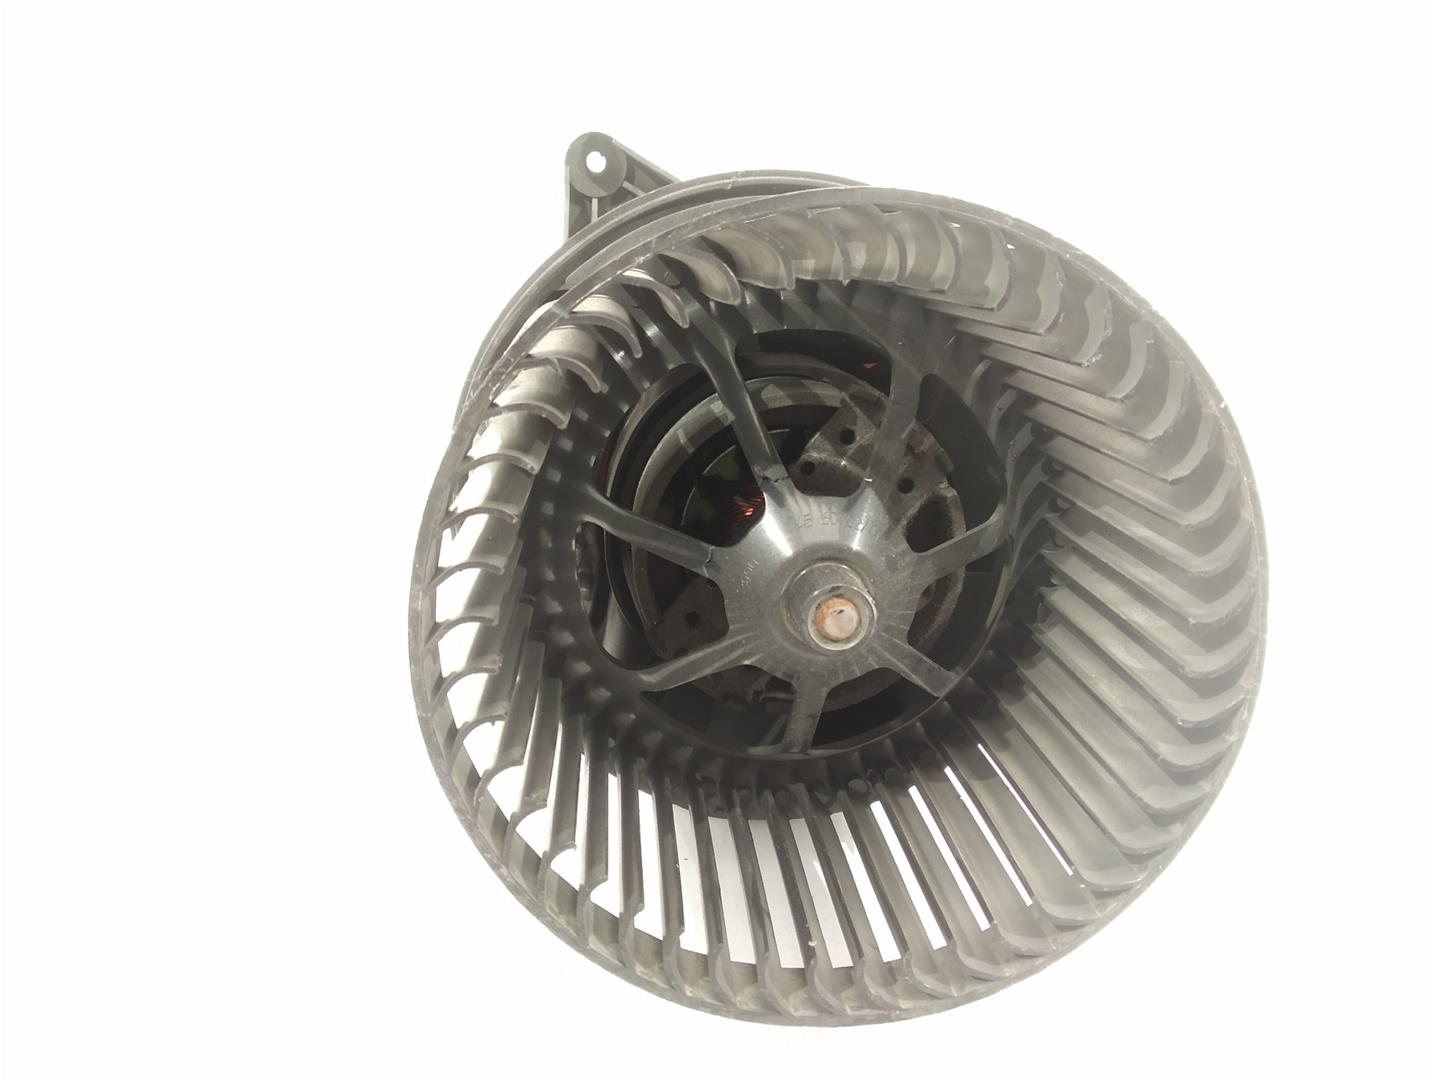 FORD Mondeo 3 generation (2000-2007) Heater Blower Fan 3S7H19E624AB, 3S7H19E624AB, 3S7H19E624AB 24604891